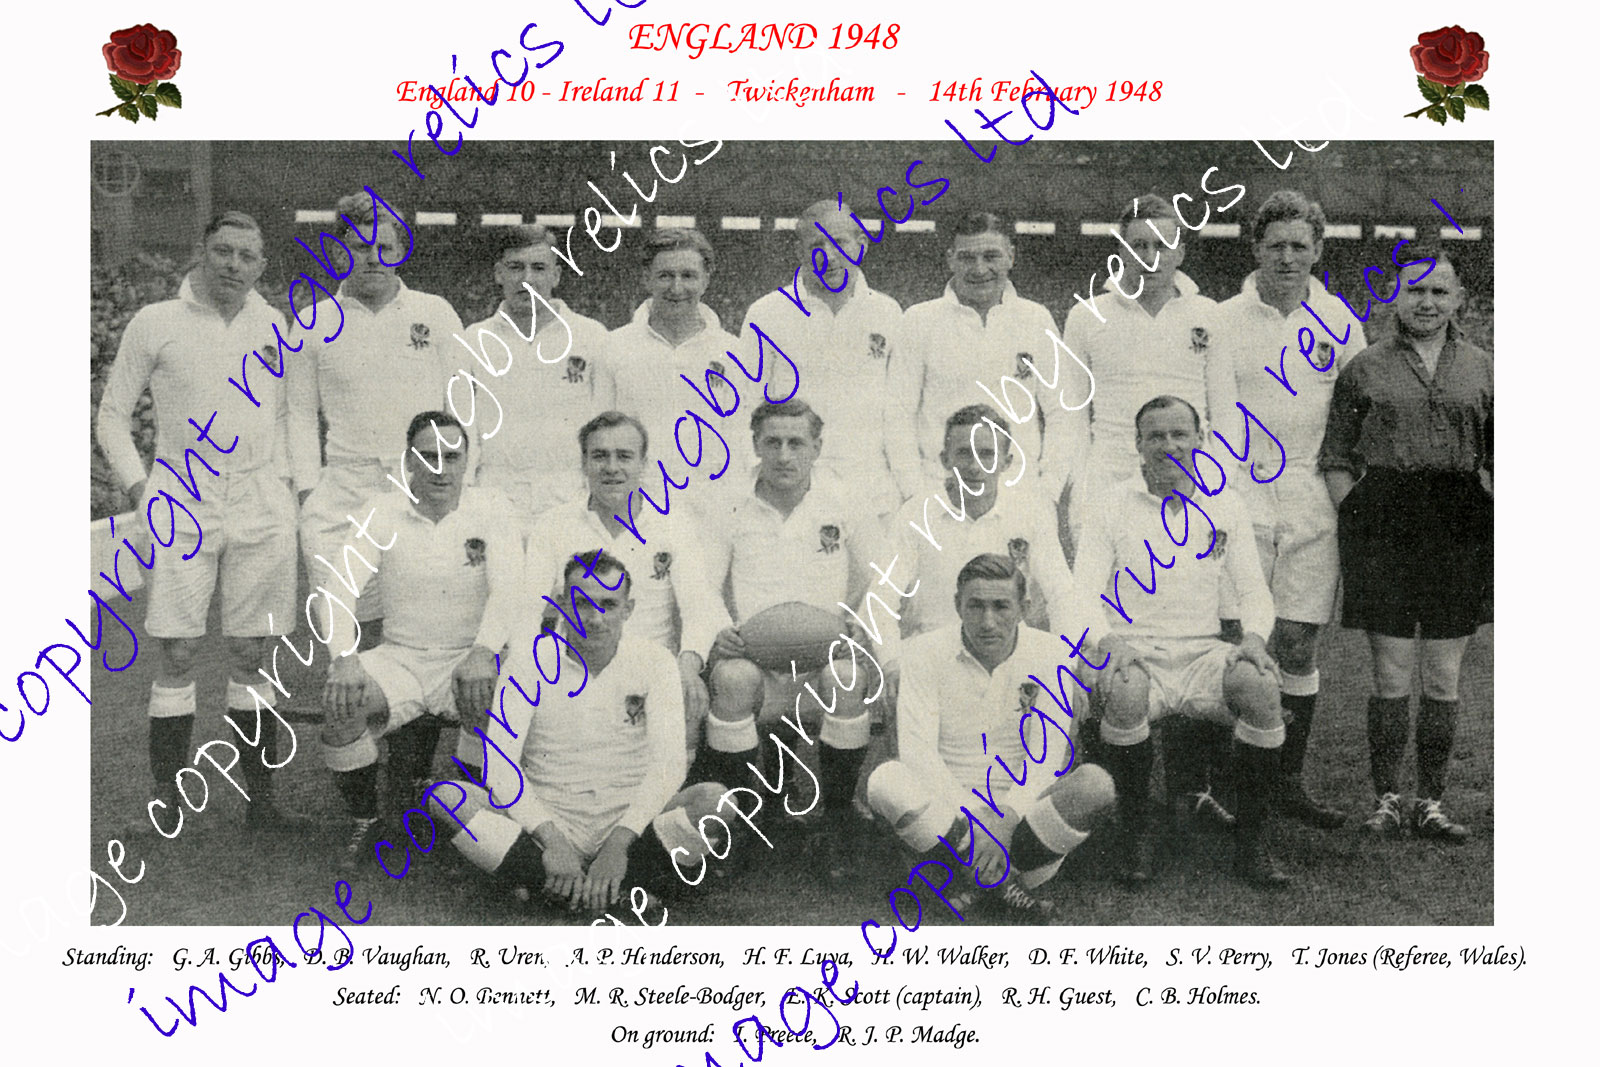 English Rugby Photographs - Teams & Players of England